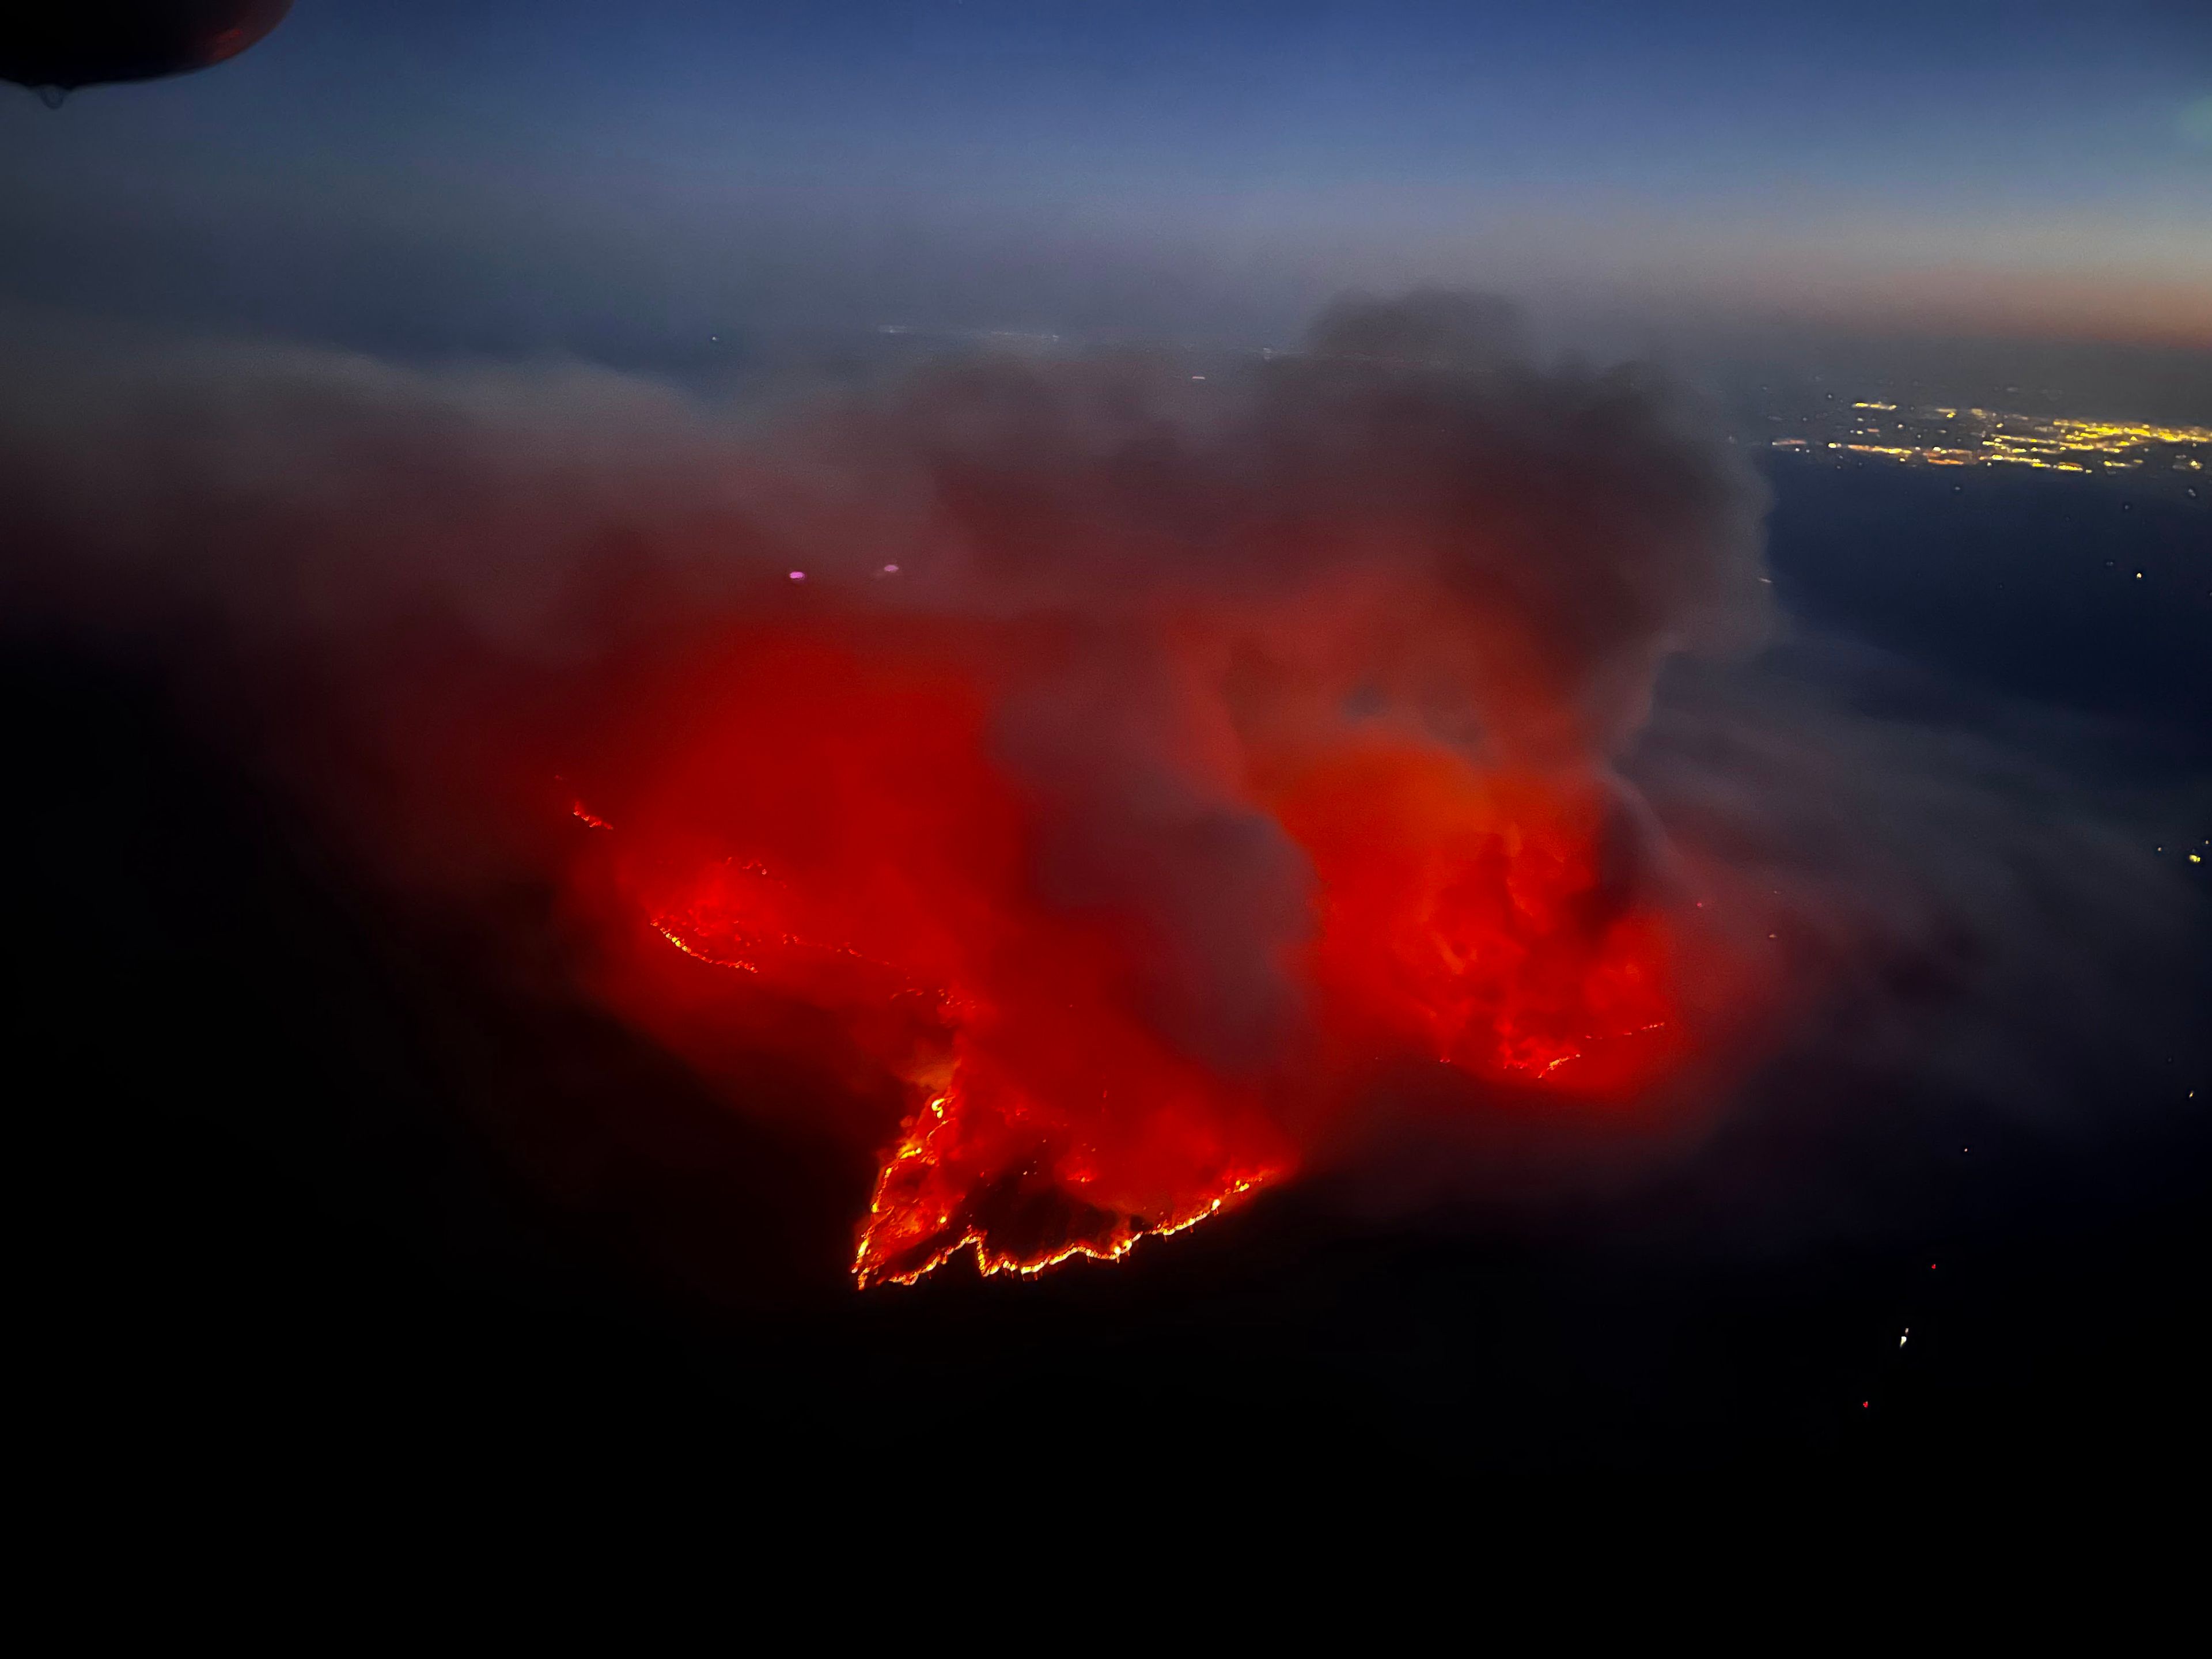 A wildfire at night, seen glowing red among the surrounding hills. 